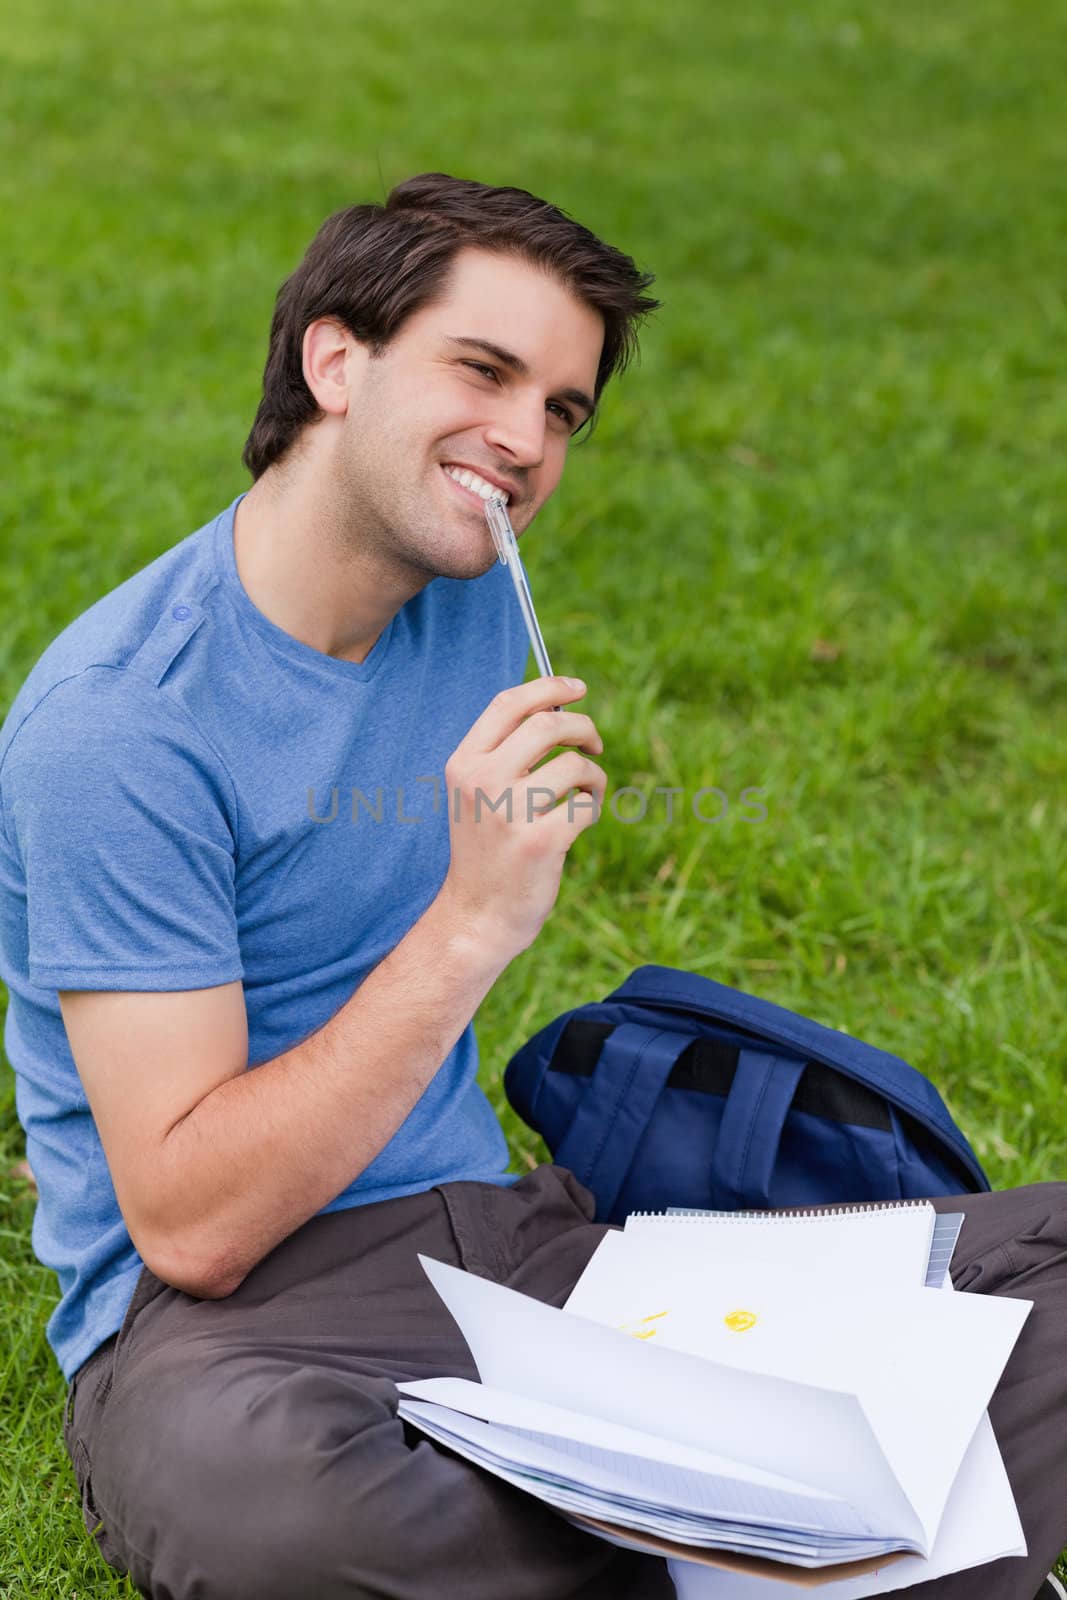 Young smiling man working while sitting on the grass in the countryside